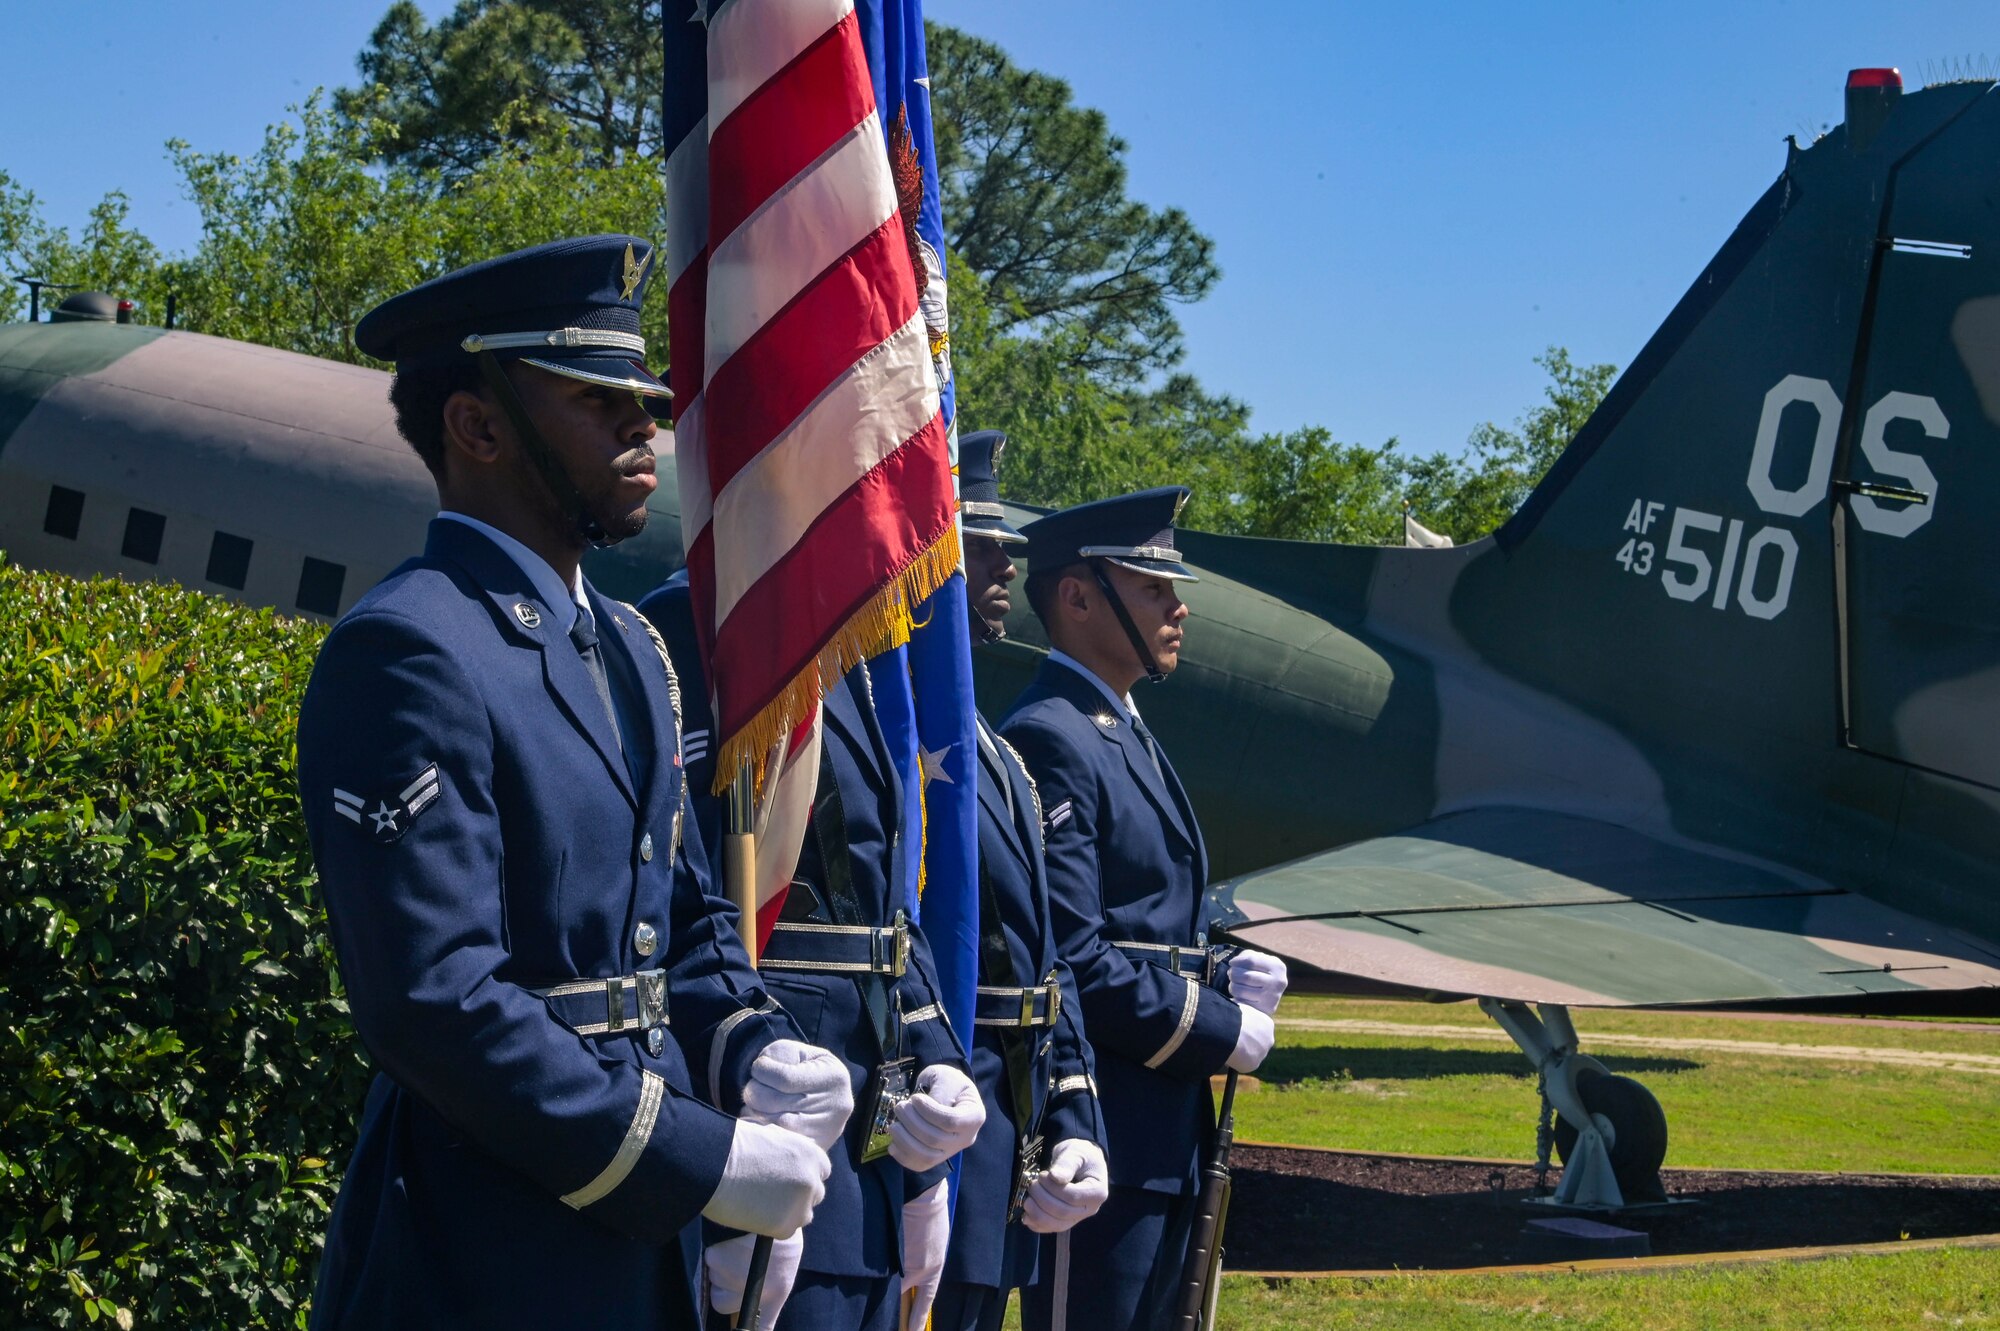 U.S. Air Force base Honor Guardsmen, assigned to the 1st Special Operations Force Support Squadron, prepare to present colors at the grand reopening of the memorial air park at Hurlburt Field, Florida, April 22, 2024.